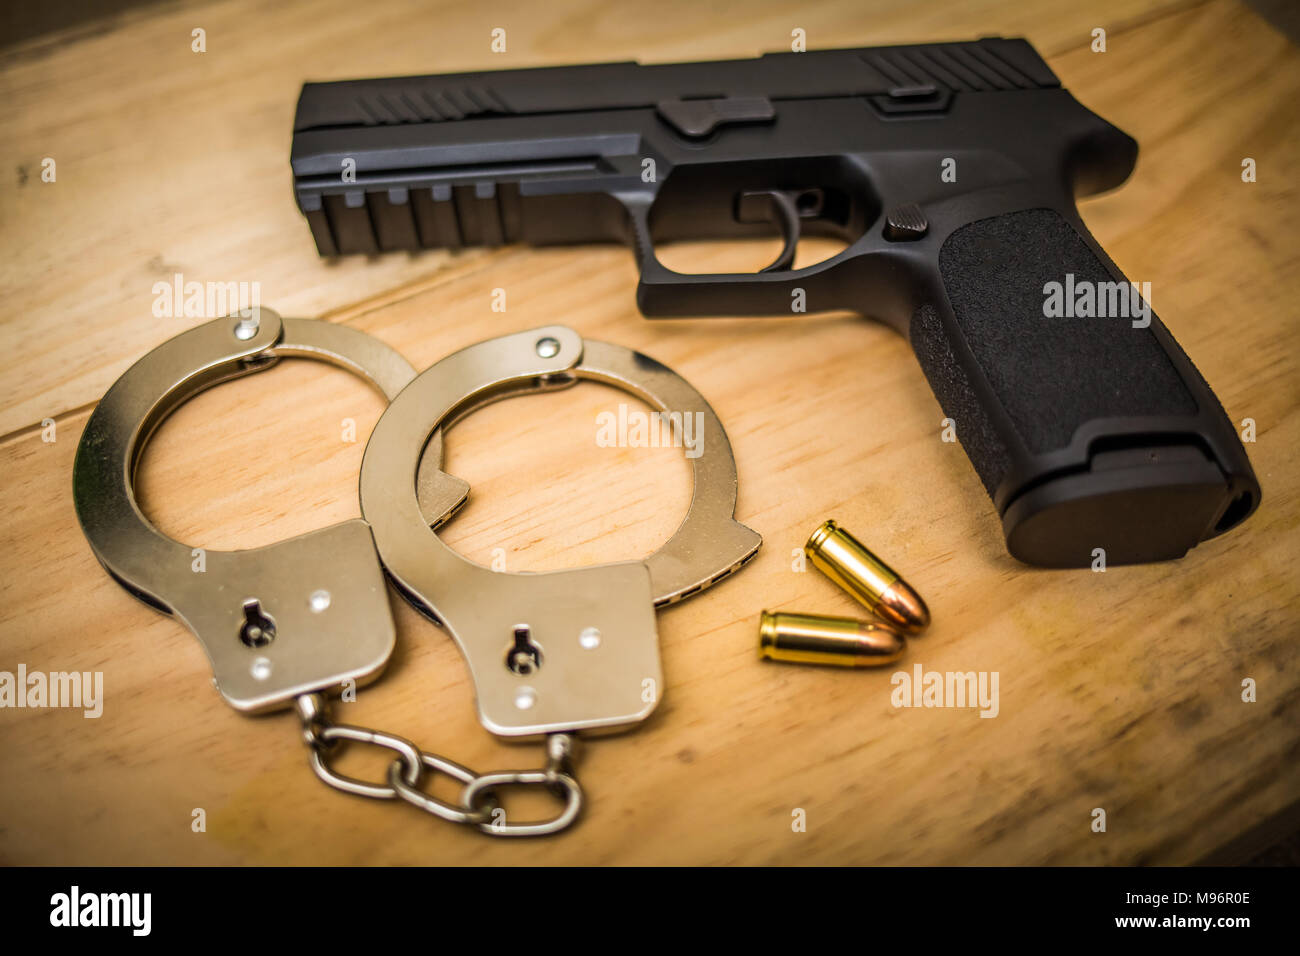 Hand gun with hand cuffs on wooden surface concept Stock Photo